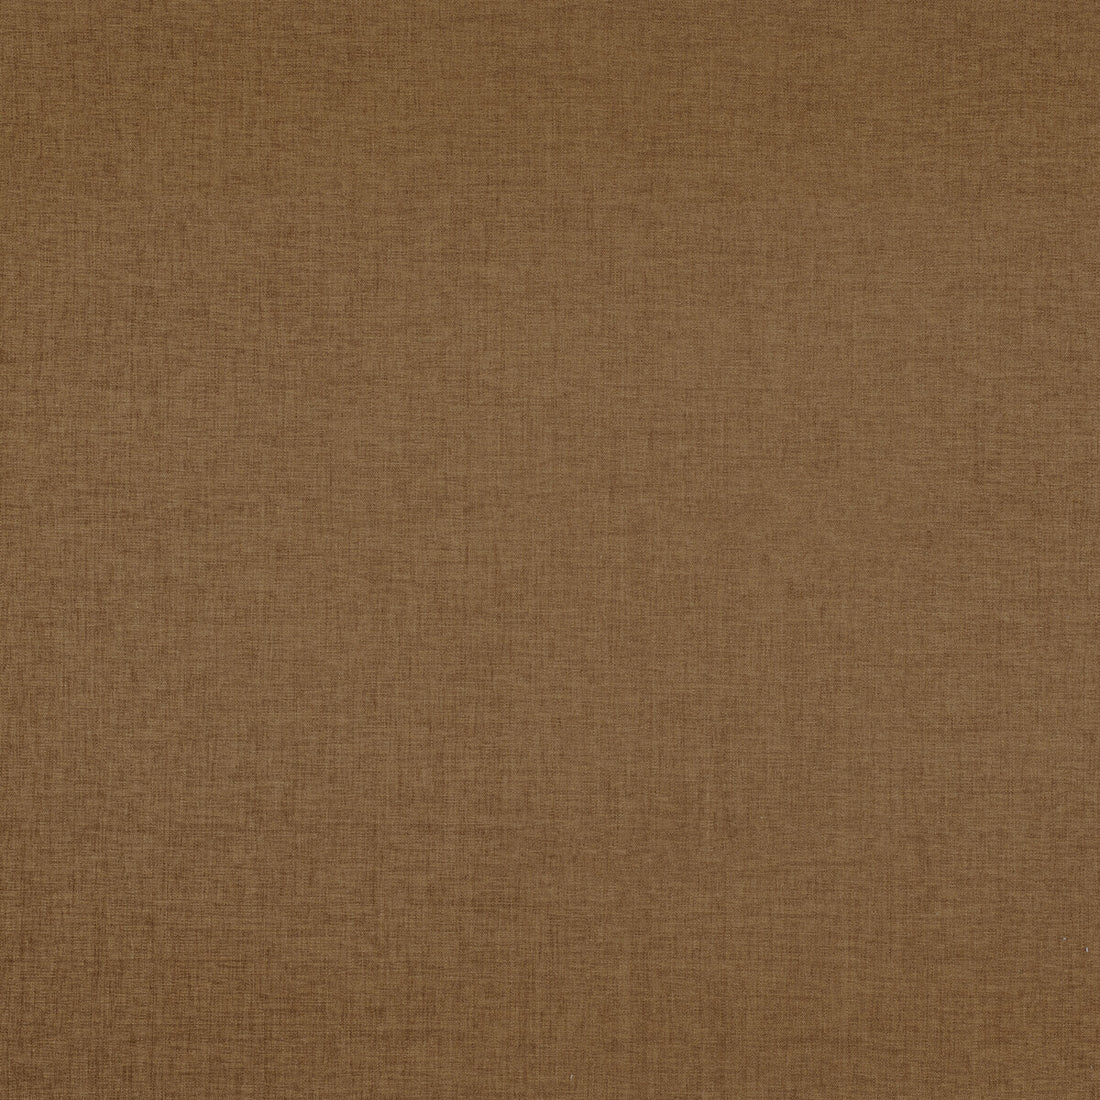 Kravet Smart fabric in 36095-6 color - pattern 36095.6.0 - by Kravet Smart in the Eco-Friendly Chenille collection